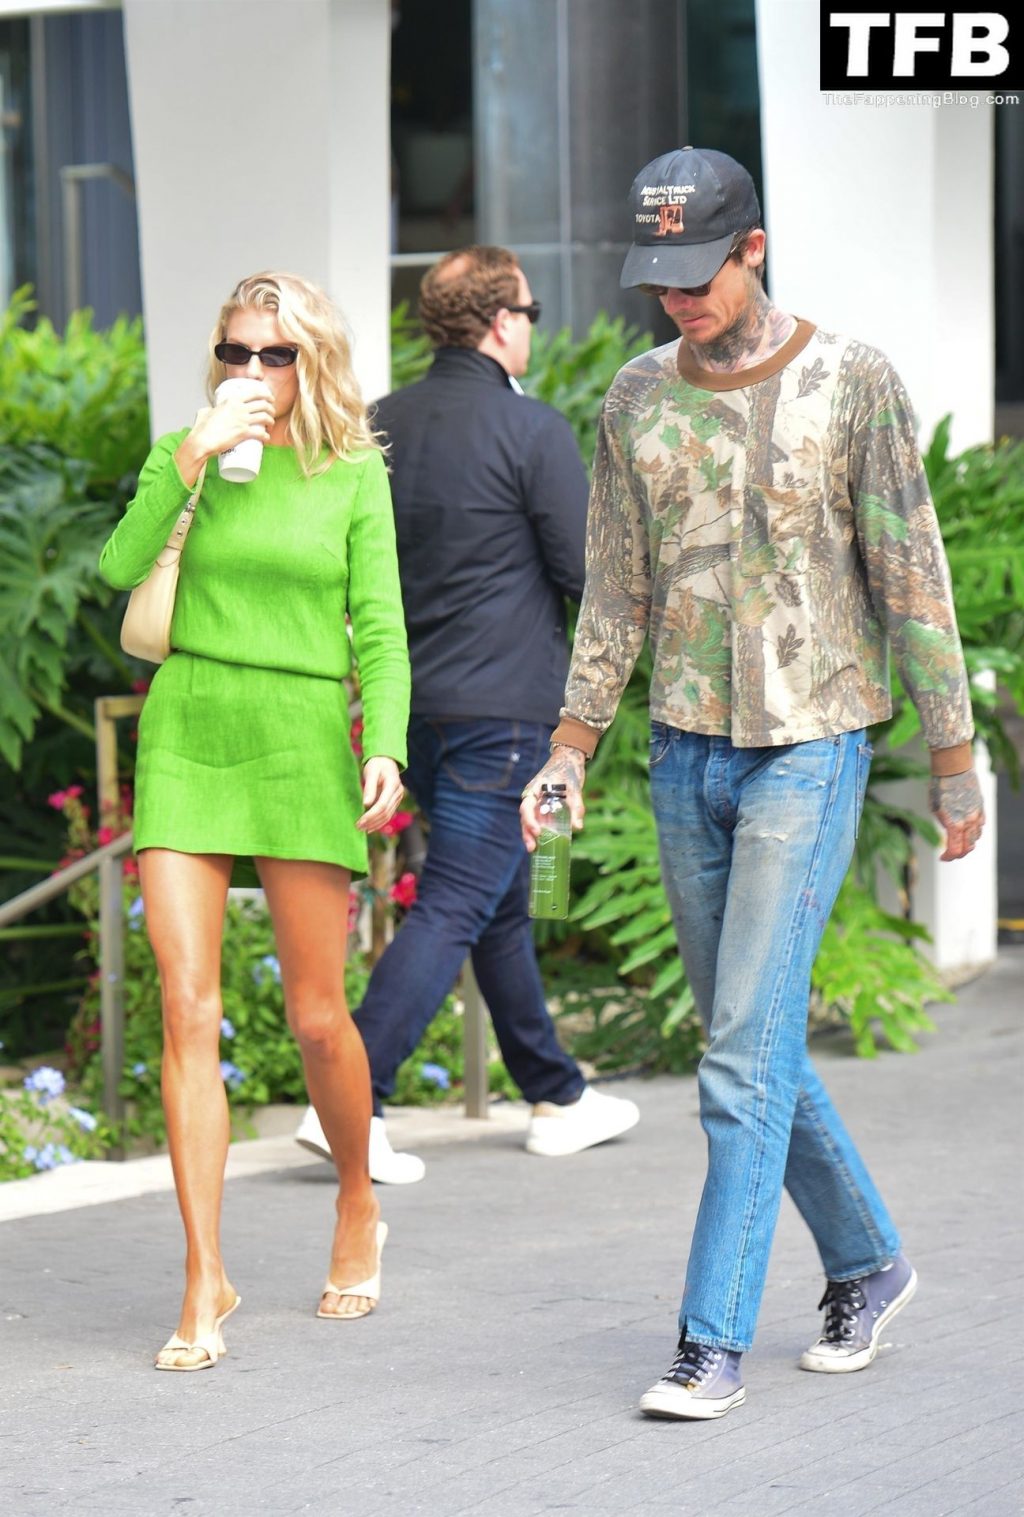 Leggy Charlotte McKinney Stands Out in Vibrant Colors Leaving the Edition Hotel in Miami (7 Photos)